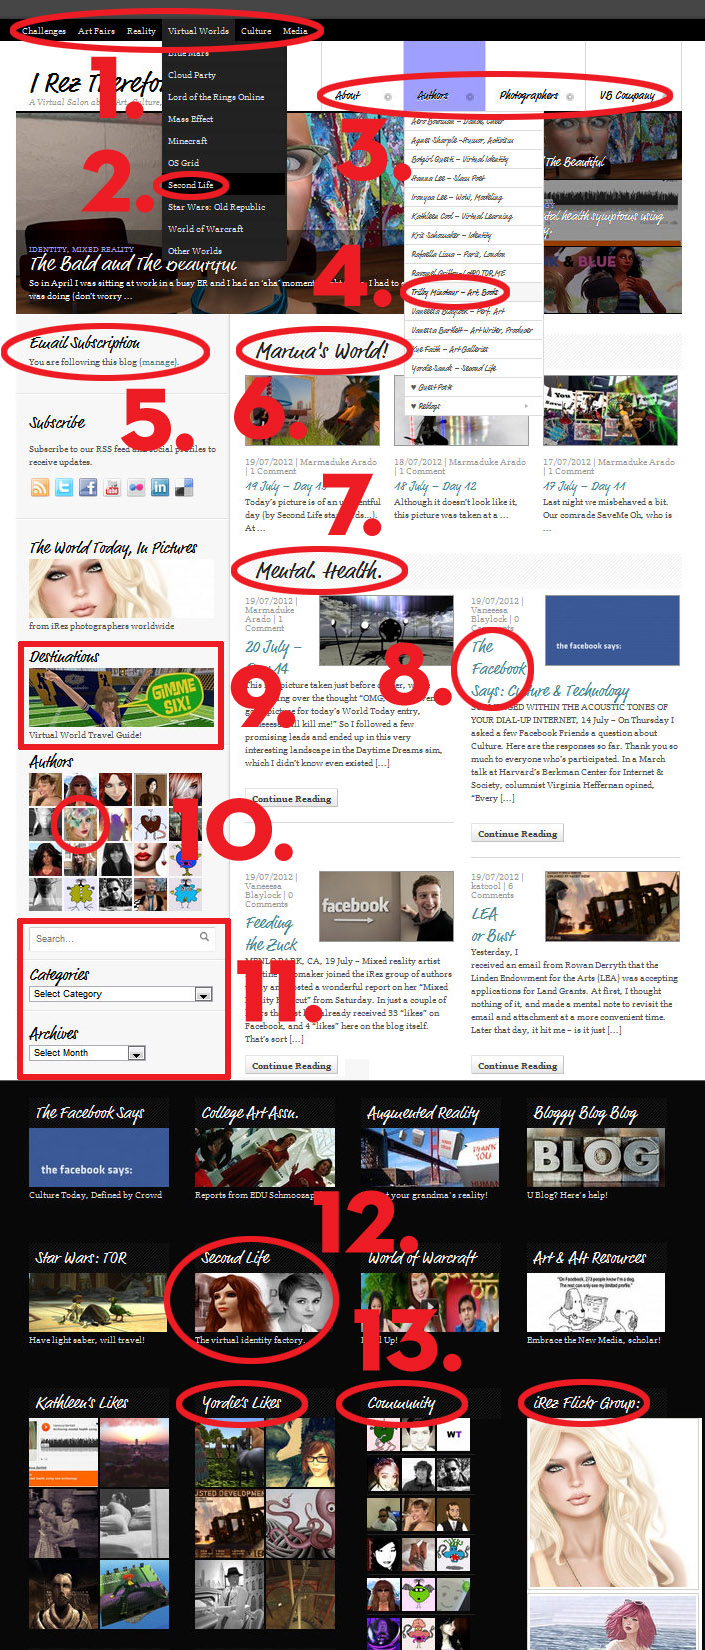 Screen Cap of entire iRez home page using WooThemes Delicious Magazine on WordPress.com with many different navigation choices circled in red and with numbers keyed to text below